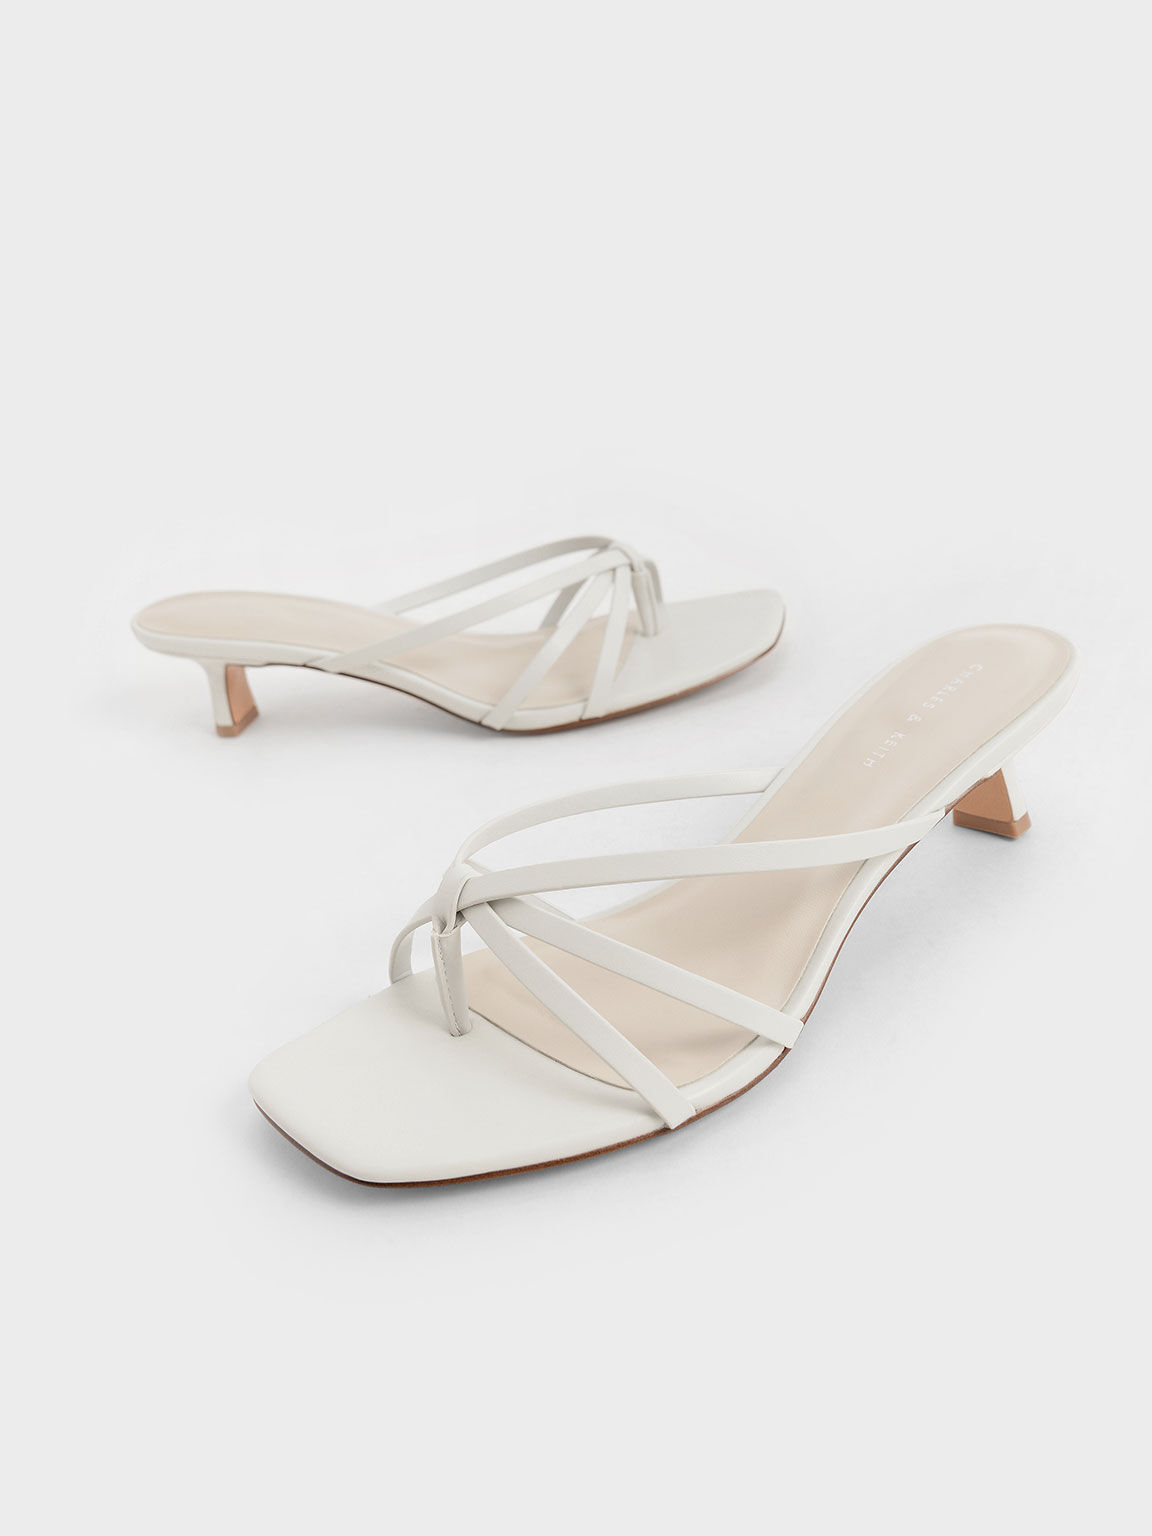 Strappy Heeled Toe-Loop Sandals, White, hi-res